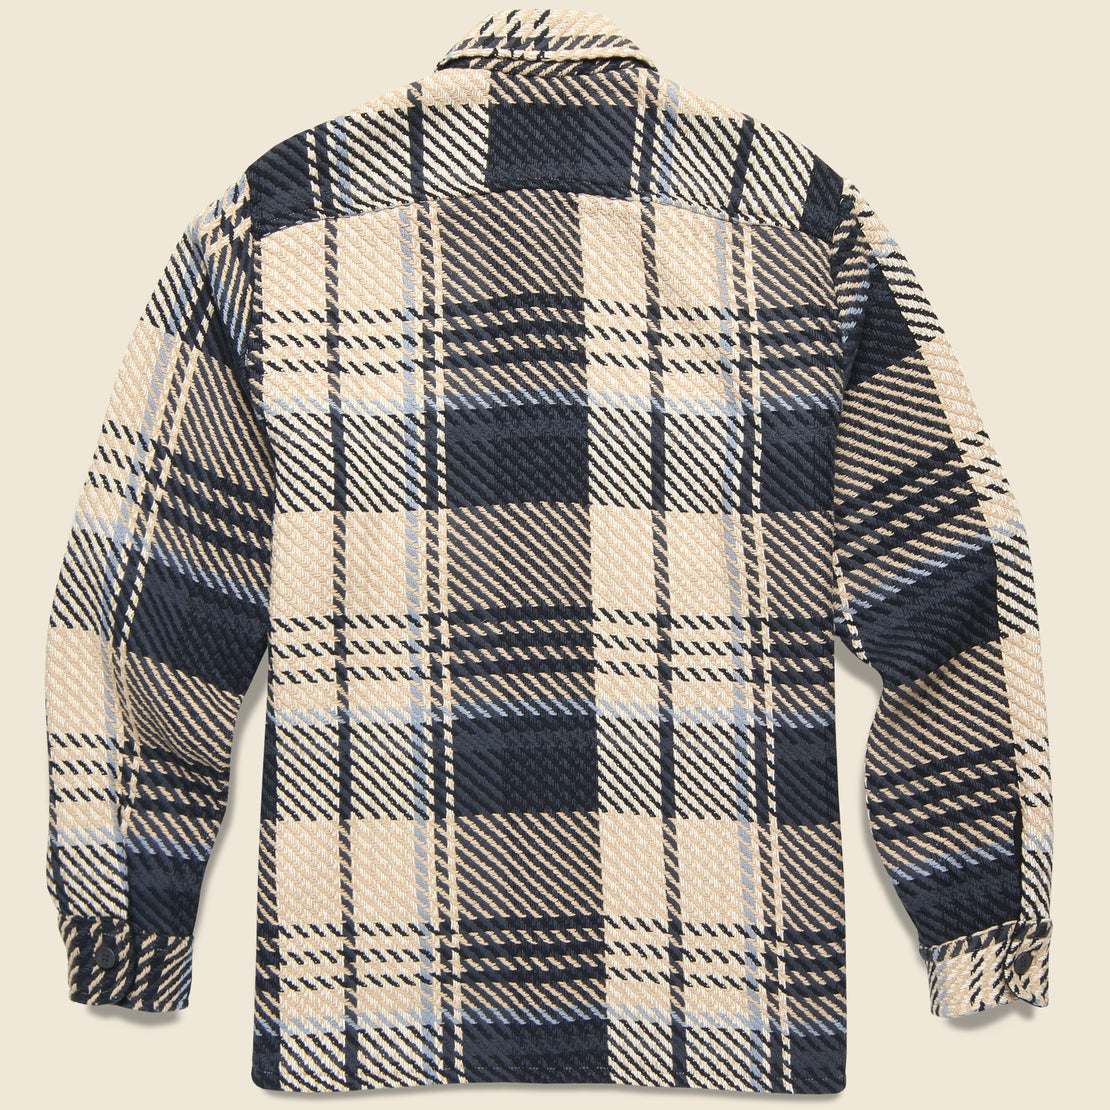 Whiting Overshirt - Black/Ecru Spear Check - Wax London - STAG Provisions - Tops - L/S Woven - Plaid